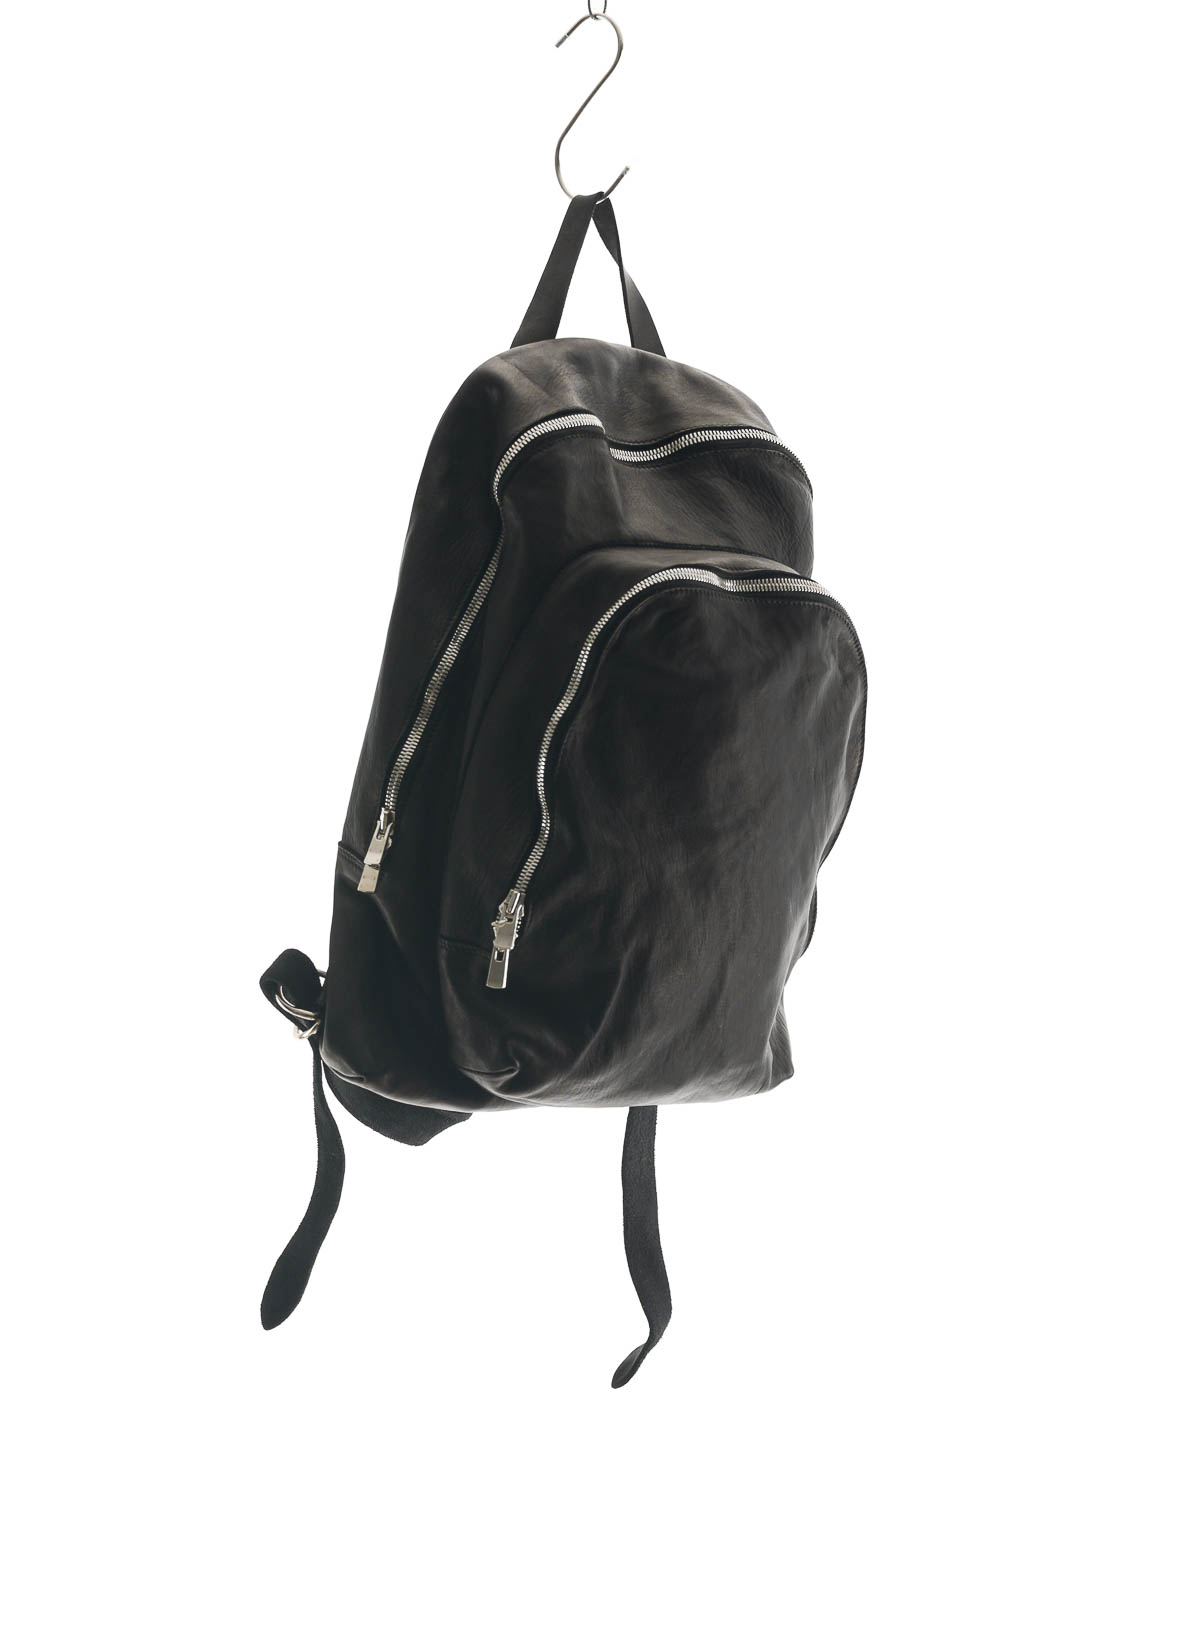 hide-m | GUIDI DBP06 2 Zip Backpack, black horse leather